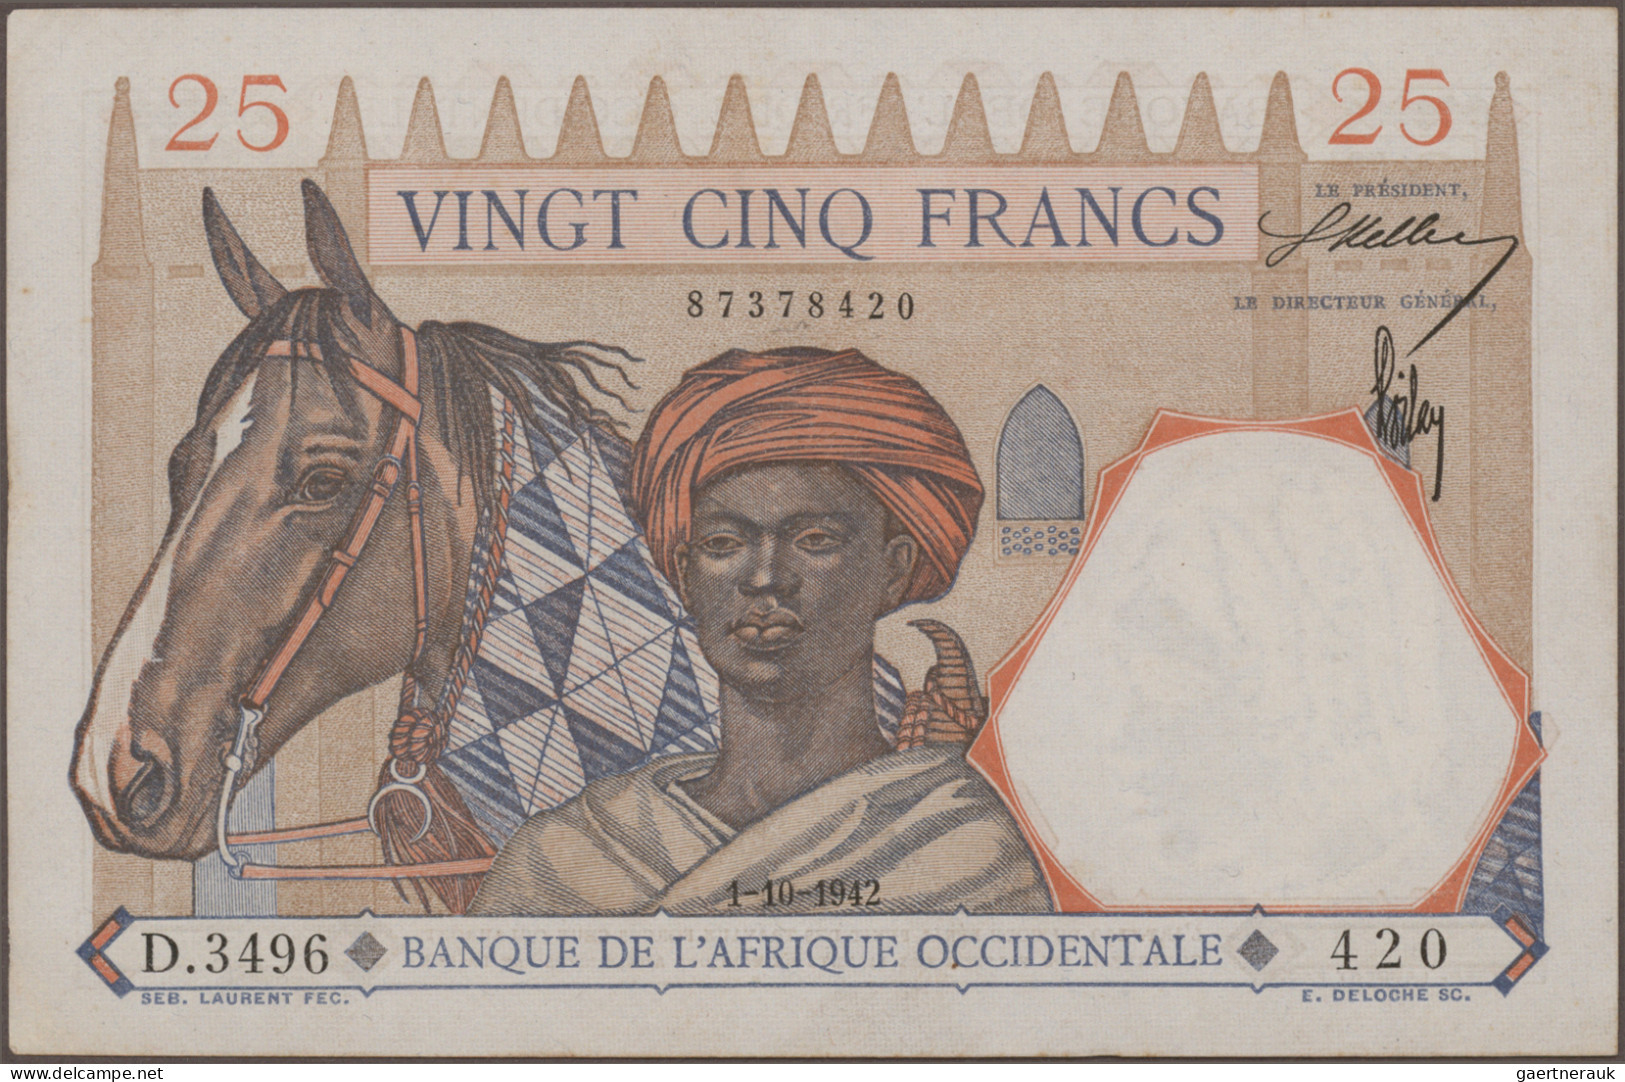 French West Africa: Banque de l'Afrique Occidentale, lot with 10 banknotes, seri